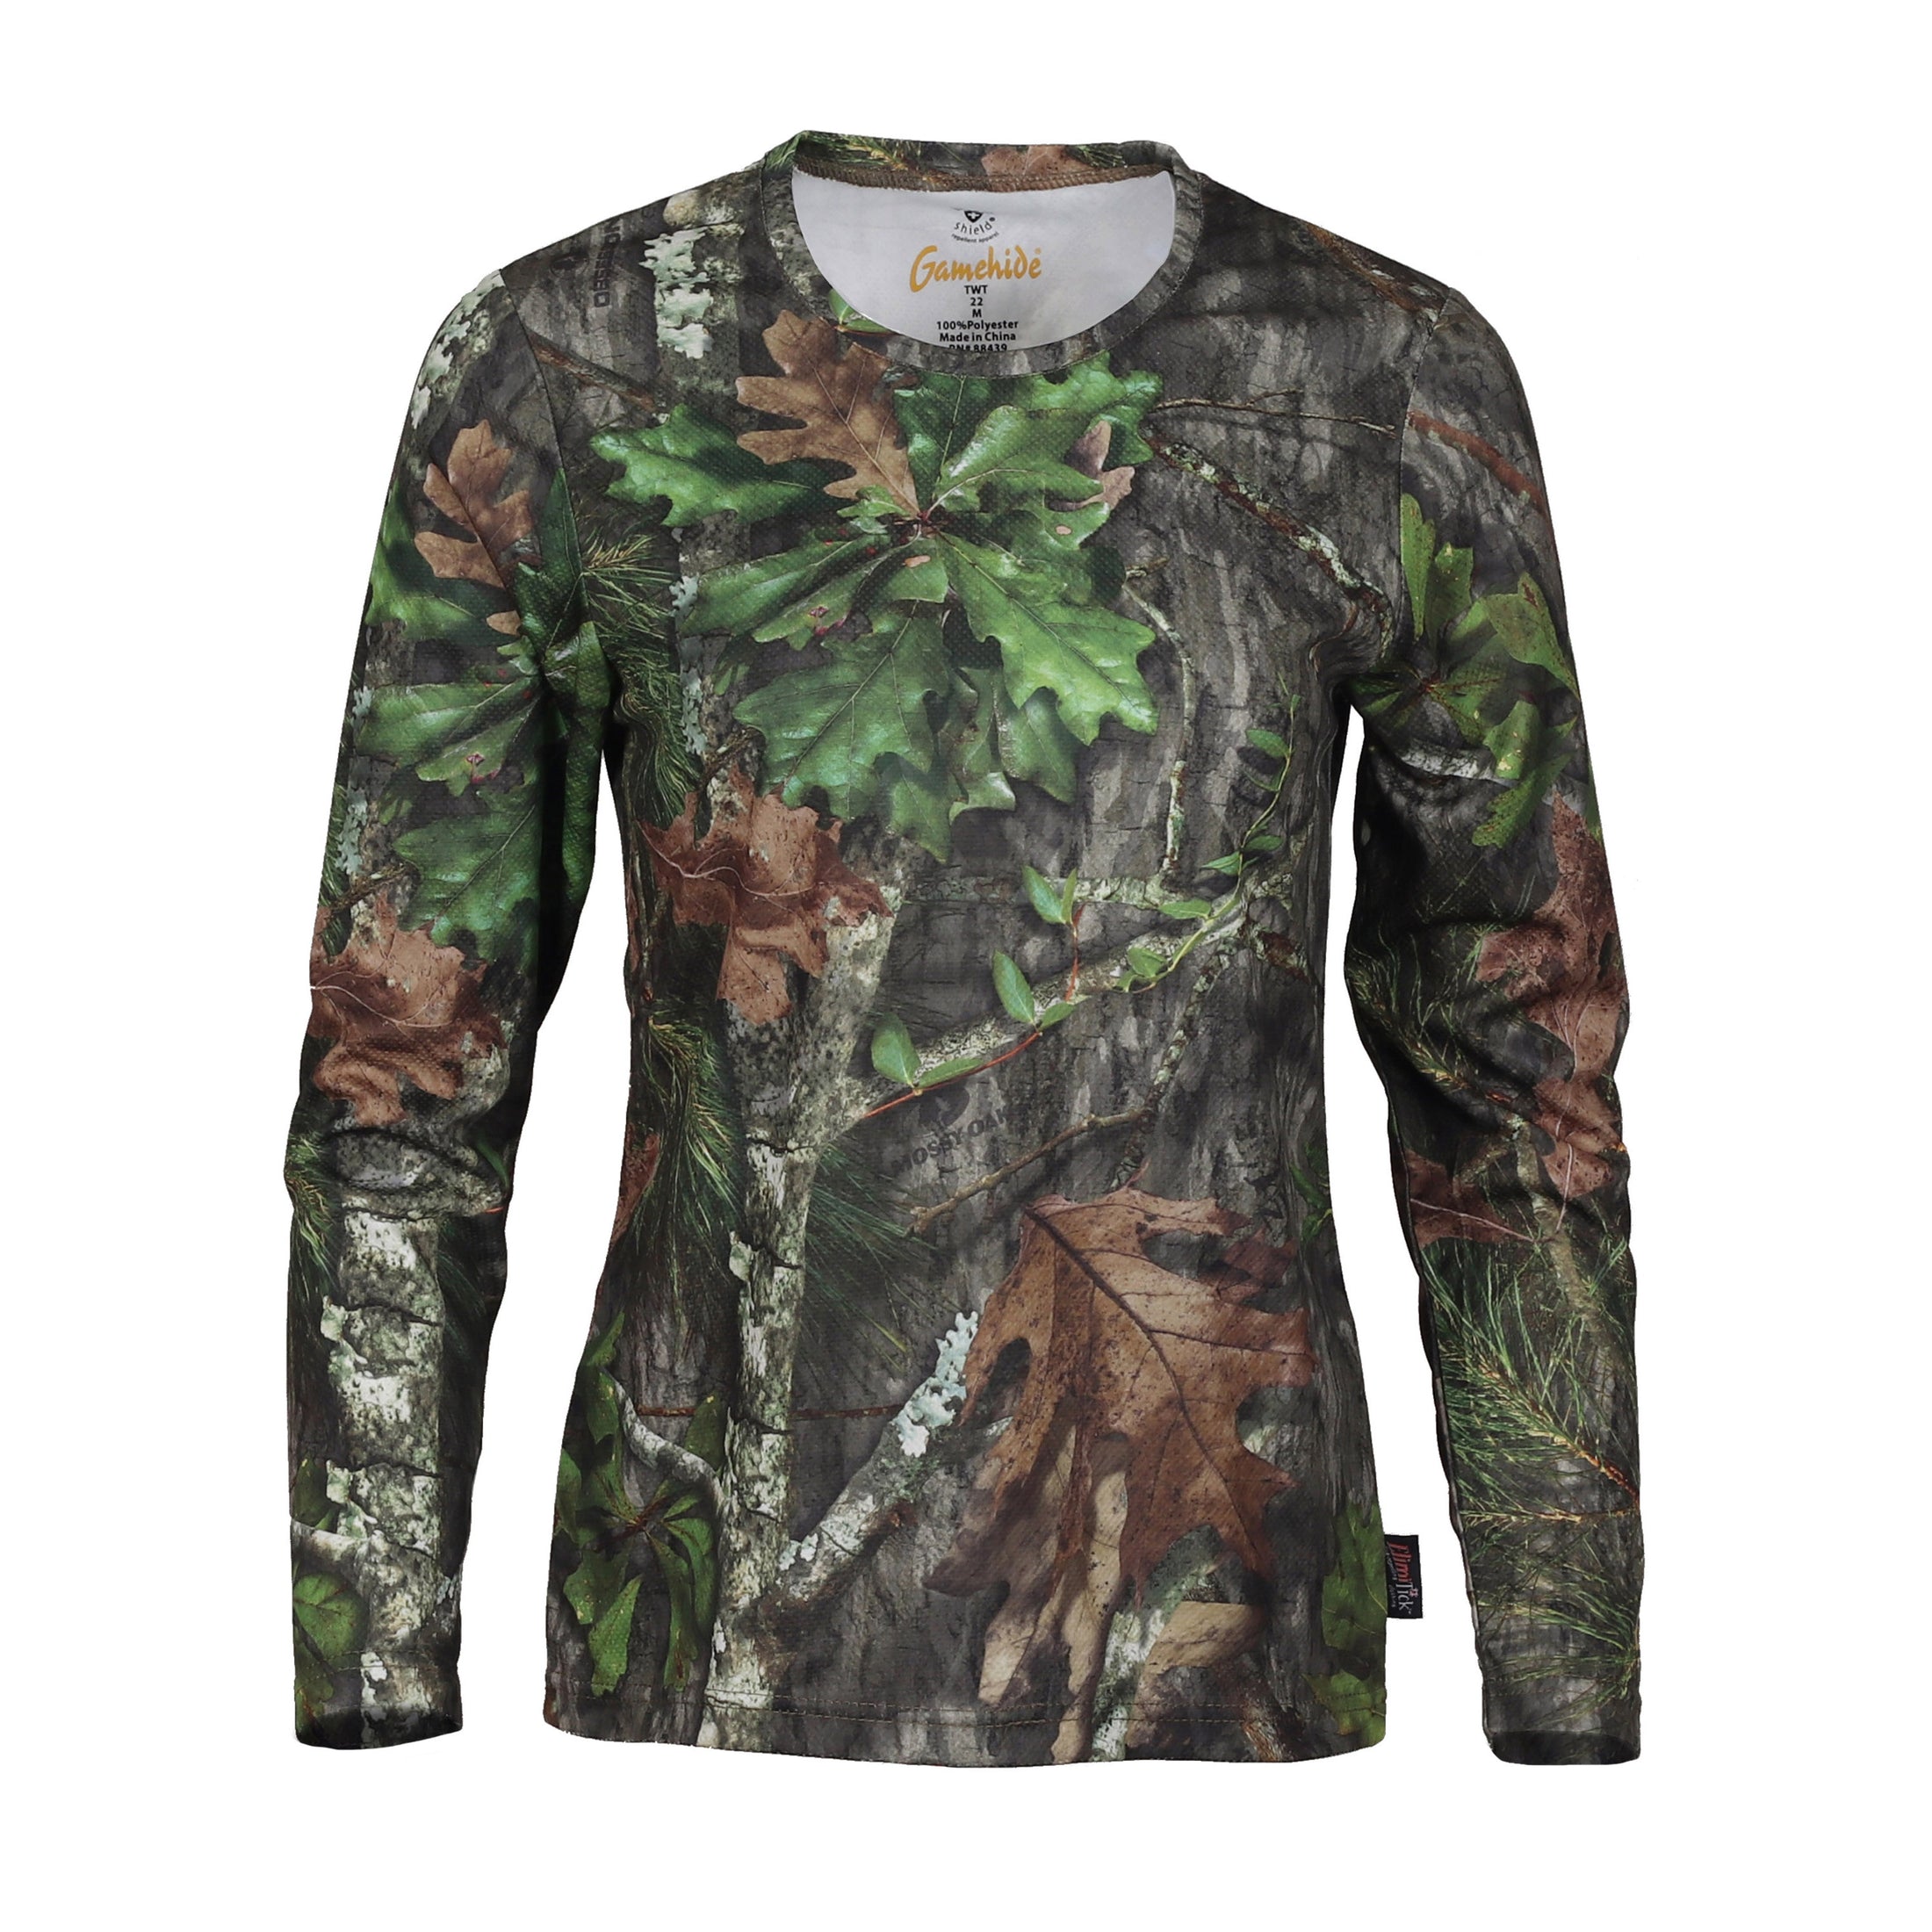 gamehide elimitick womens long sleeve shirt front view (mossy oak obsession)